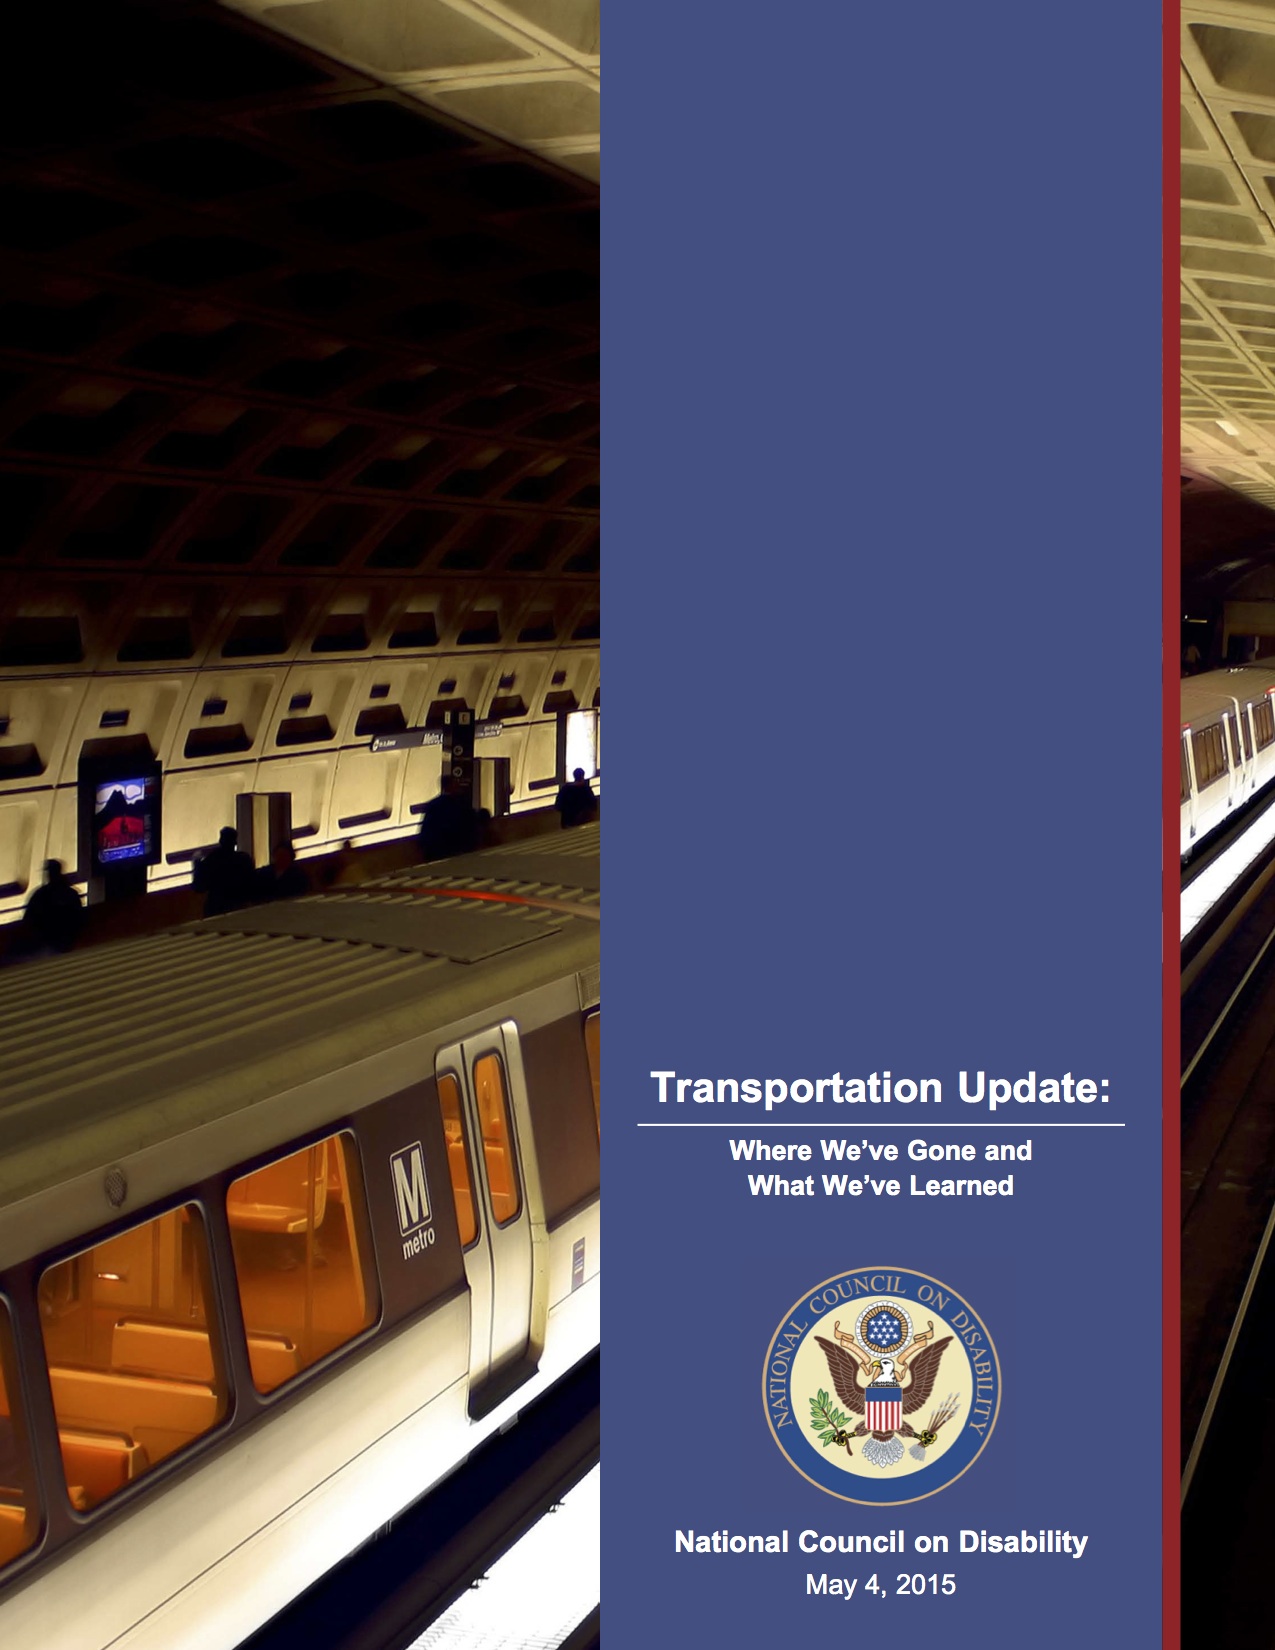 Transportation Update: Where We’ve Gone and What We’ve Learned